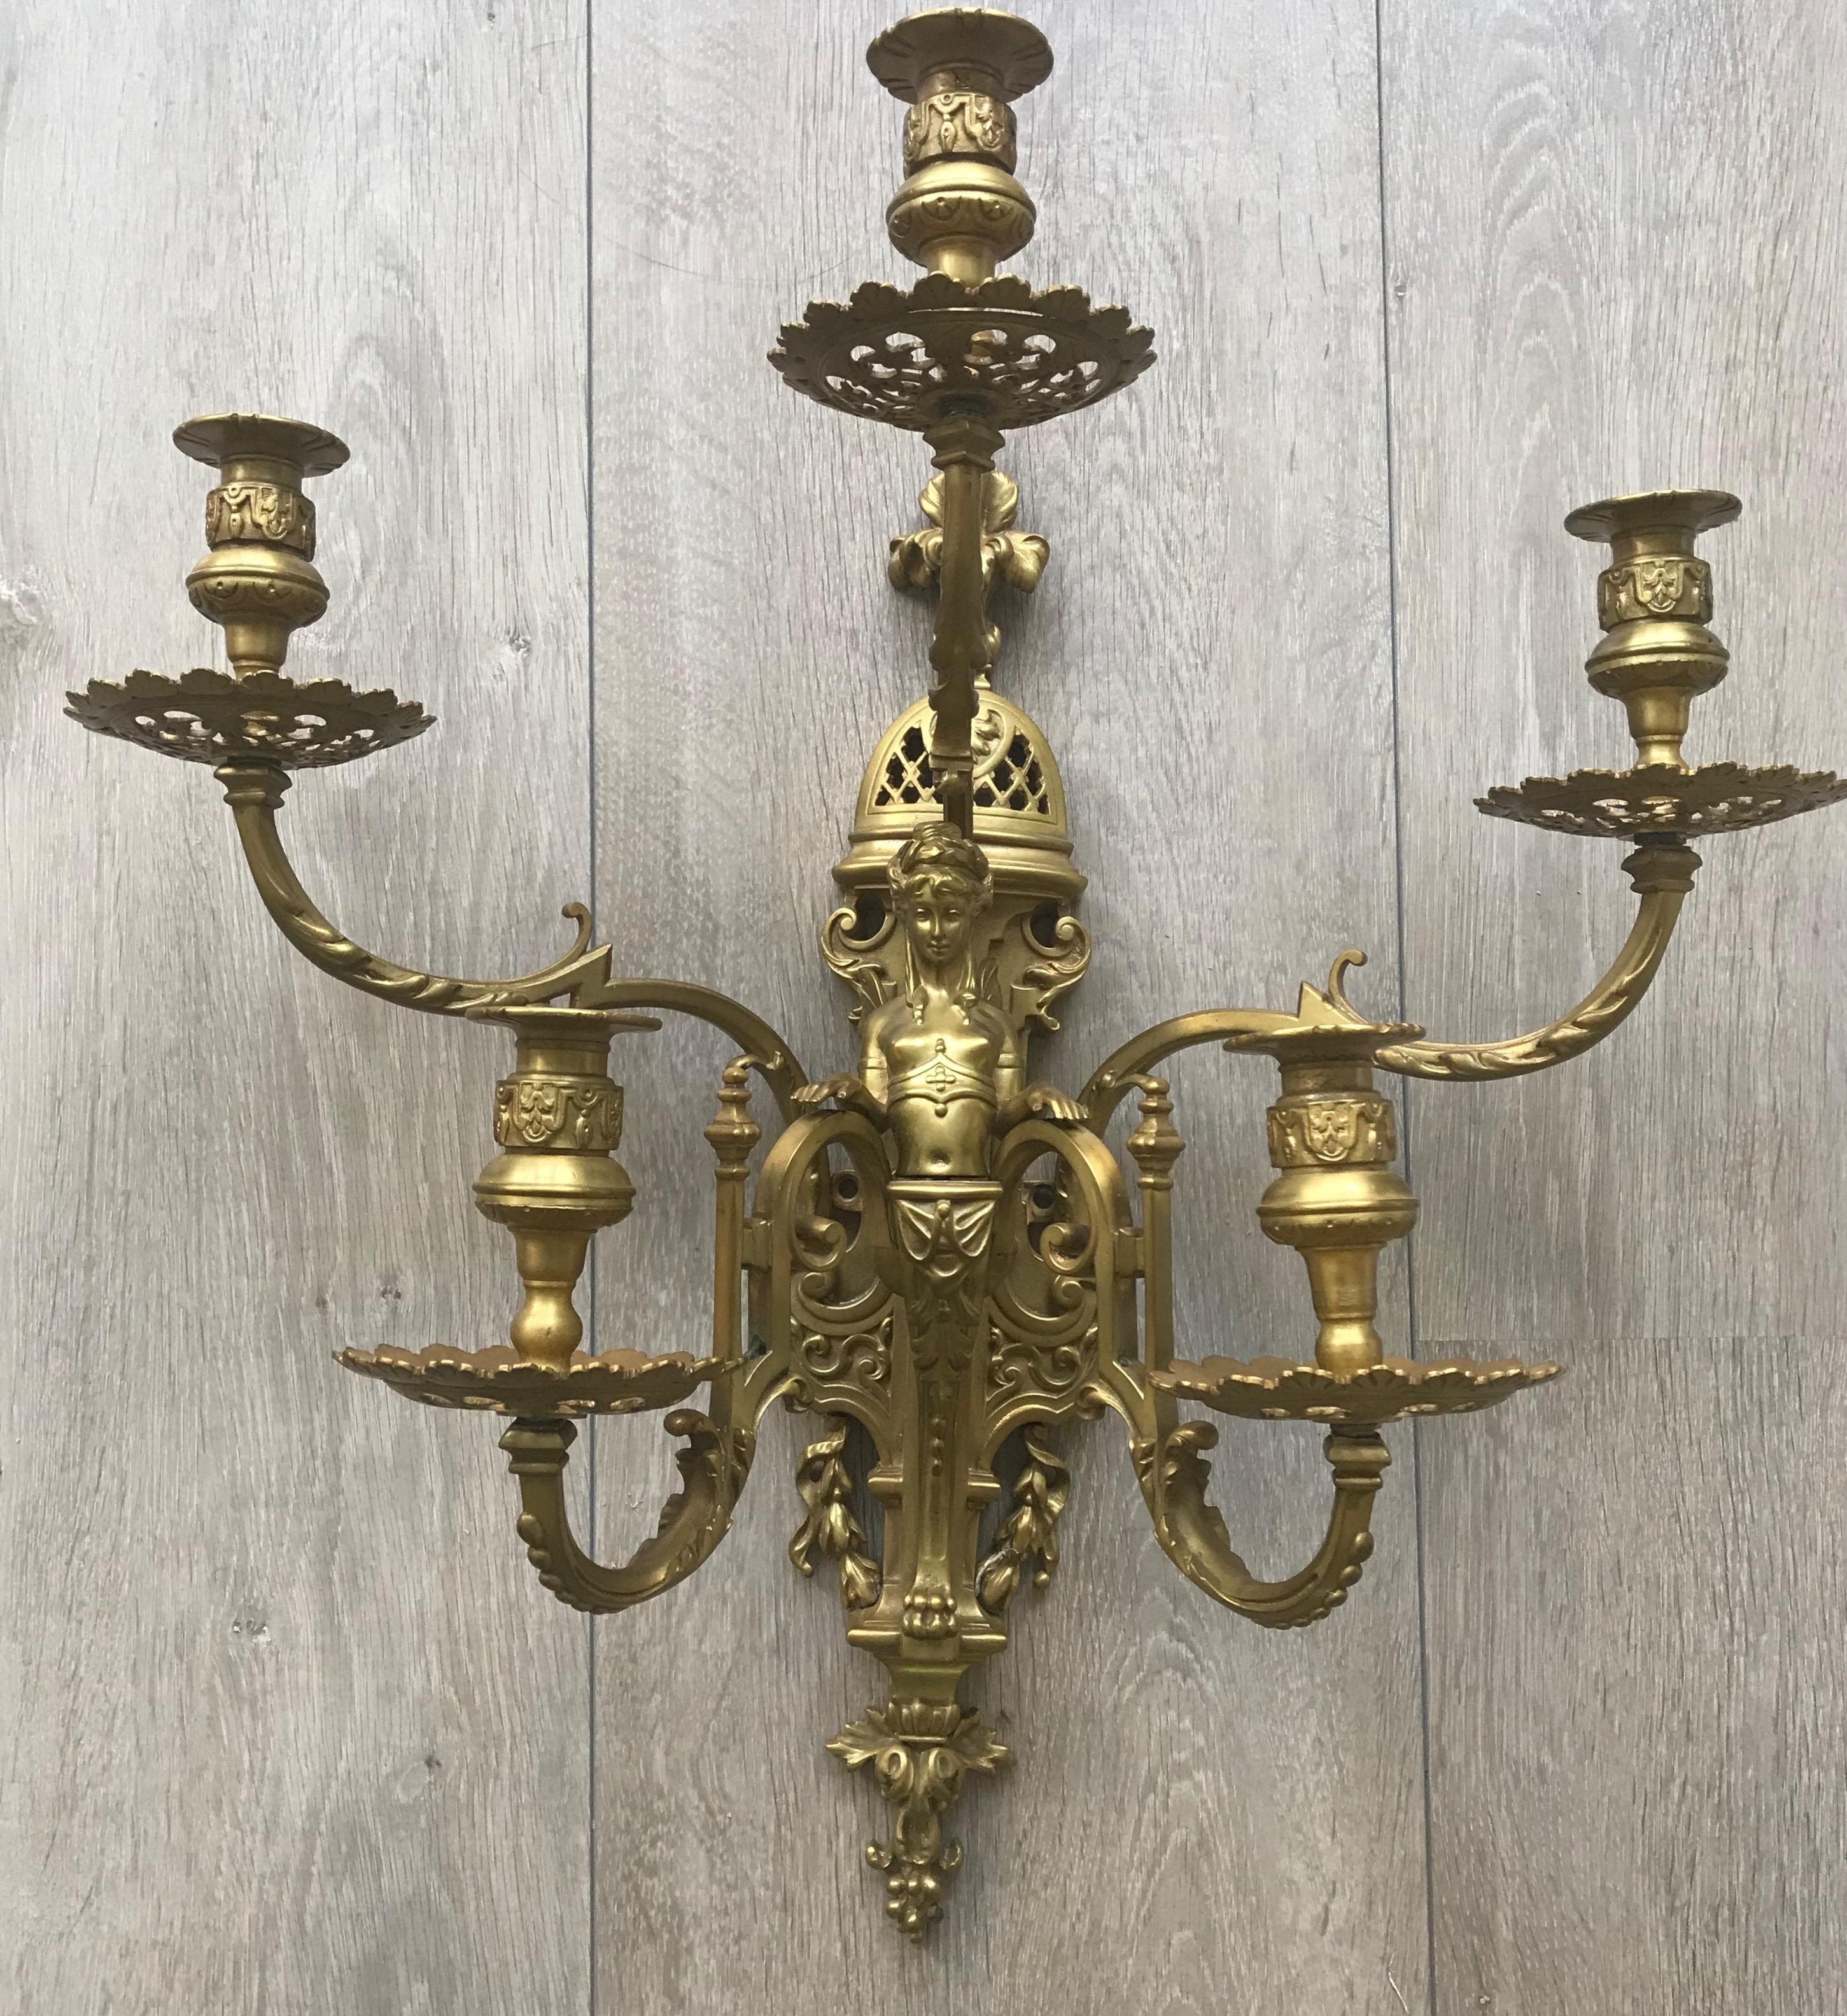 Stunning & Large Antique Bronze Wall Lamp / Candle Sconce with Goddess Sculpture For Sale 2